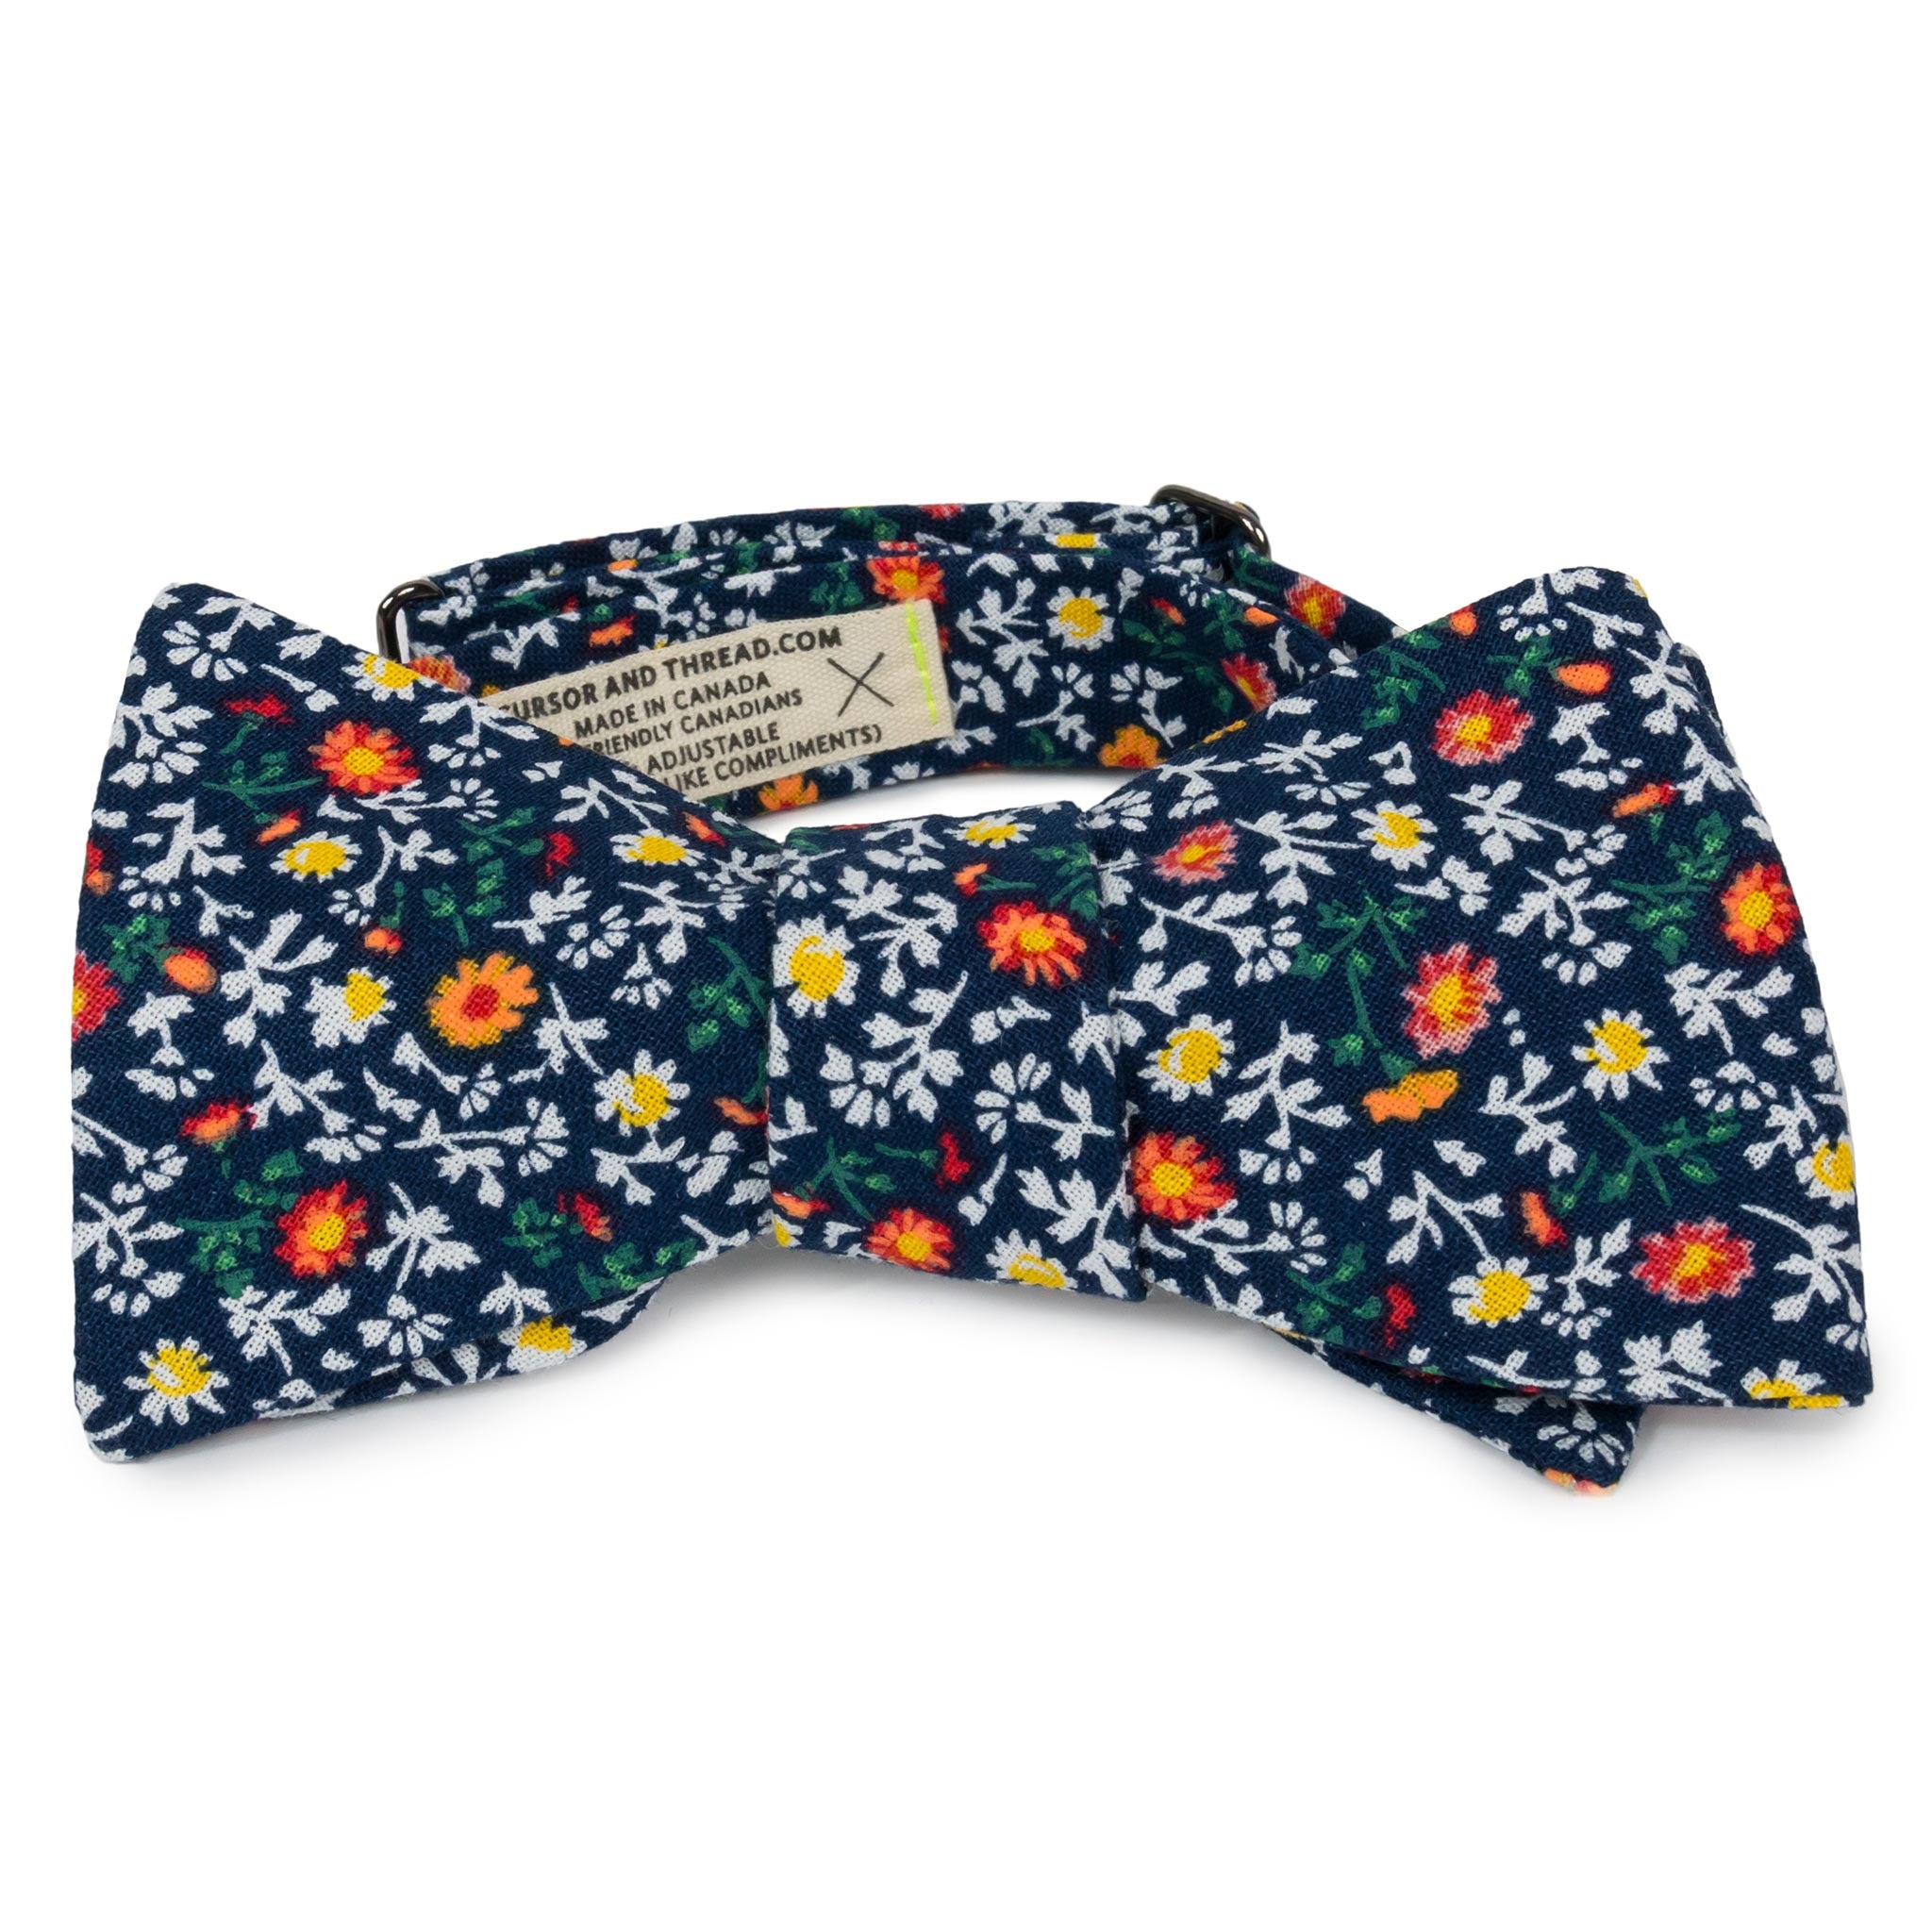 Marigold Navy Floral Cotton Bow Tie Made in Canada